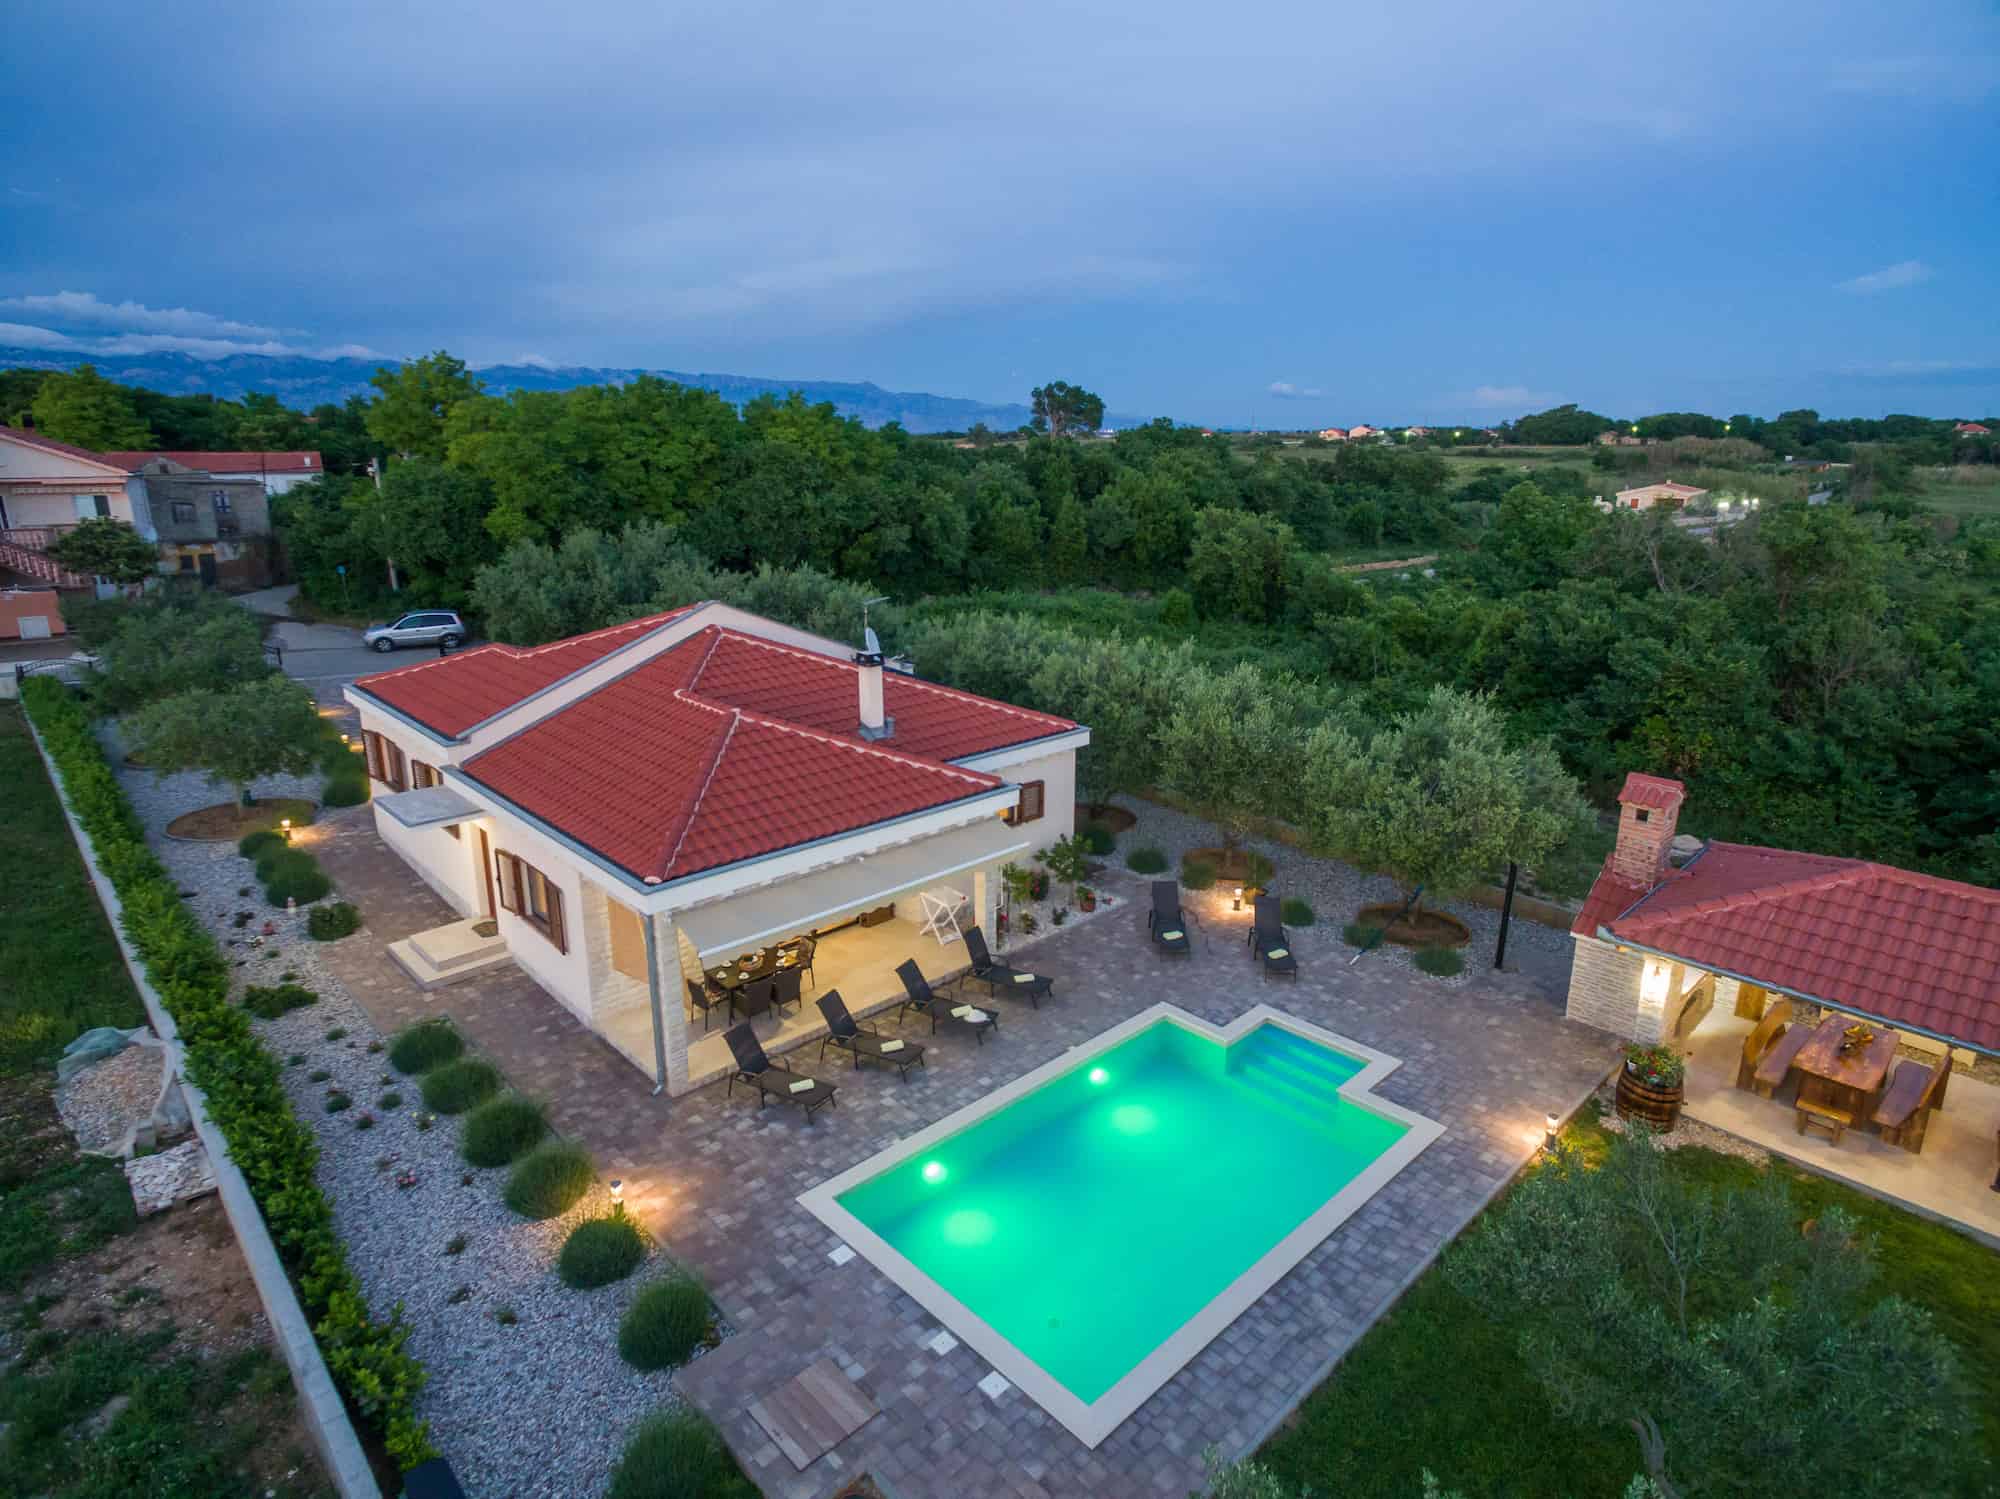 Stone villa with pool in beautiful nature, near the sandy beach